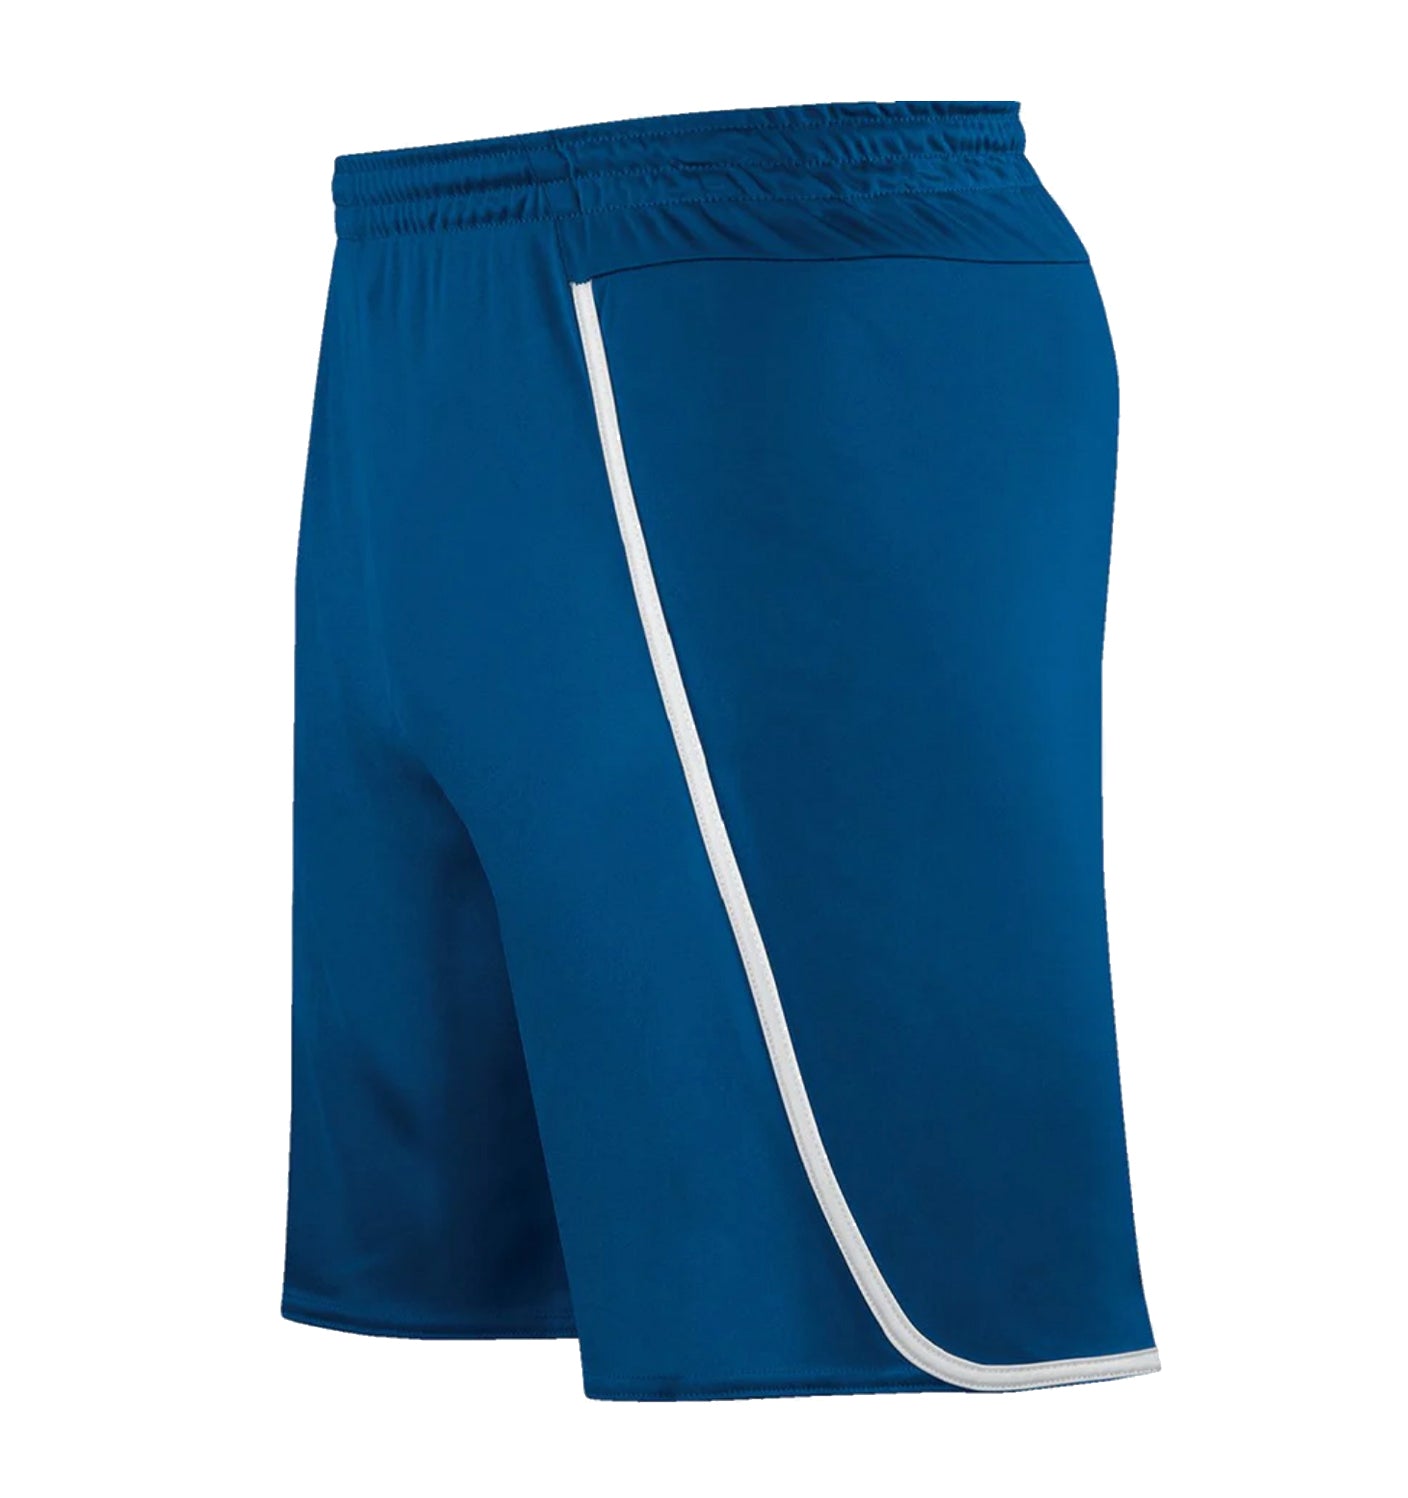 Pacific Soccer Shorts - Adult - Youth Sports Products